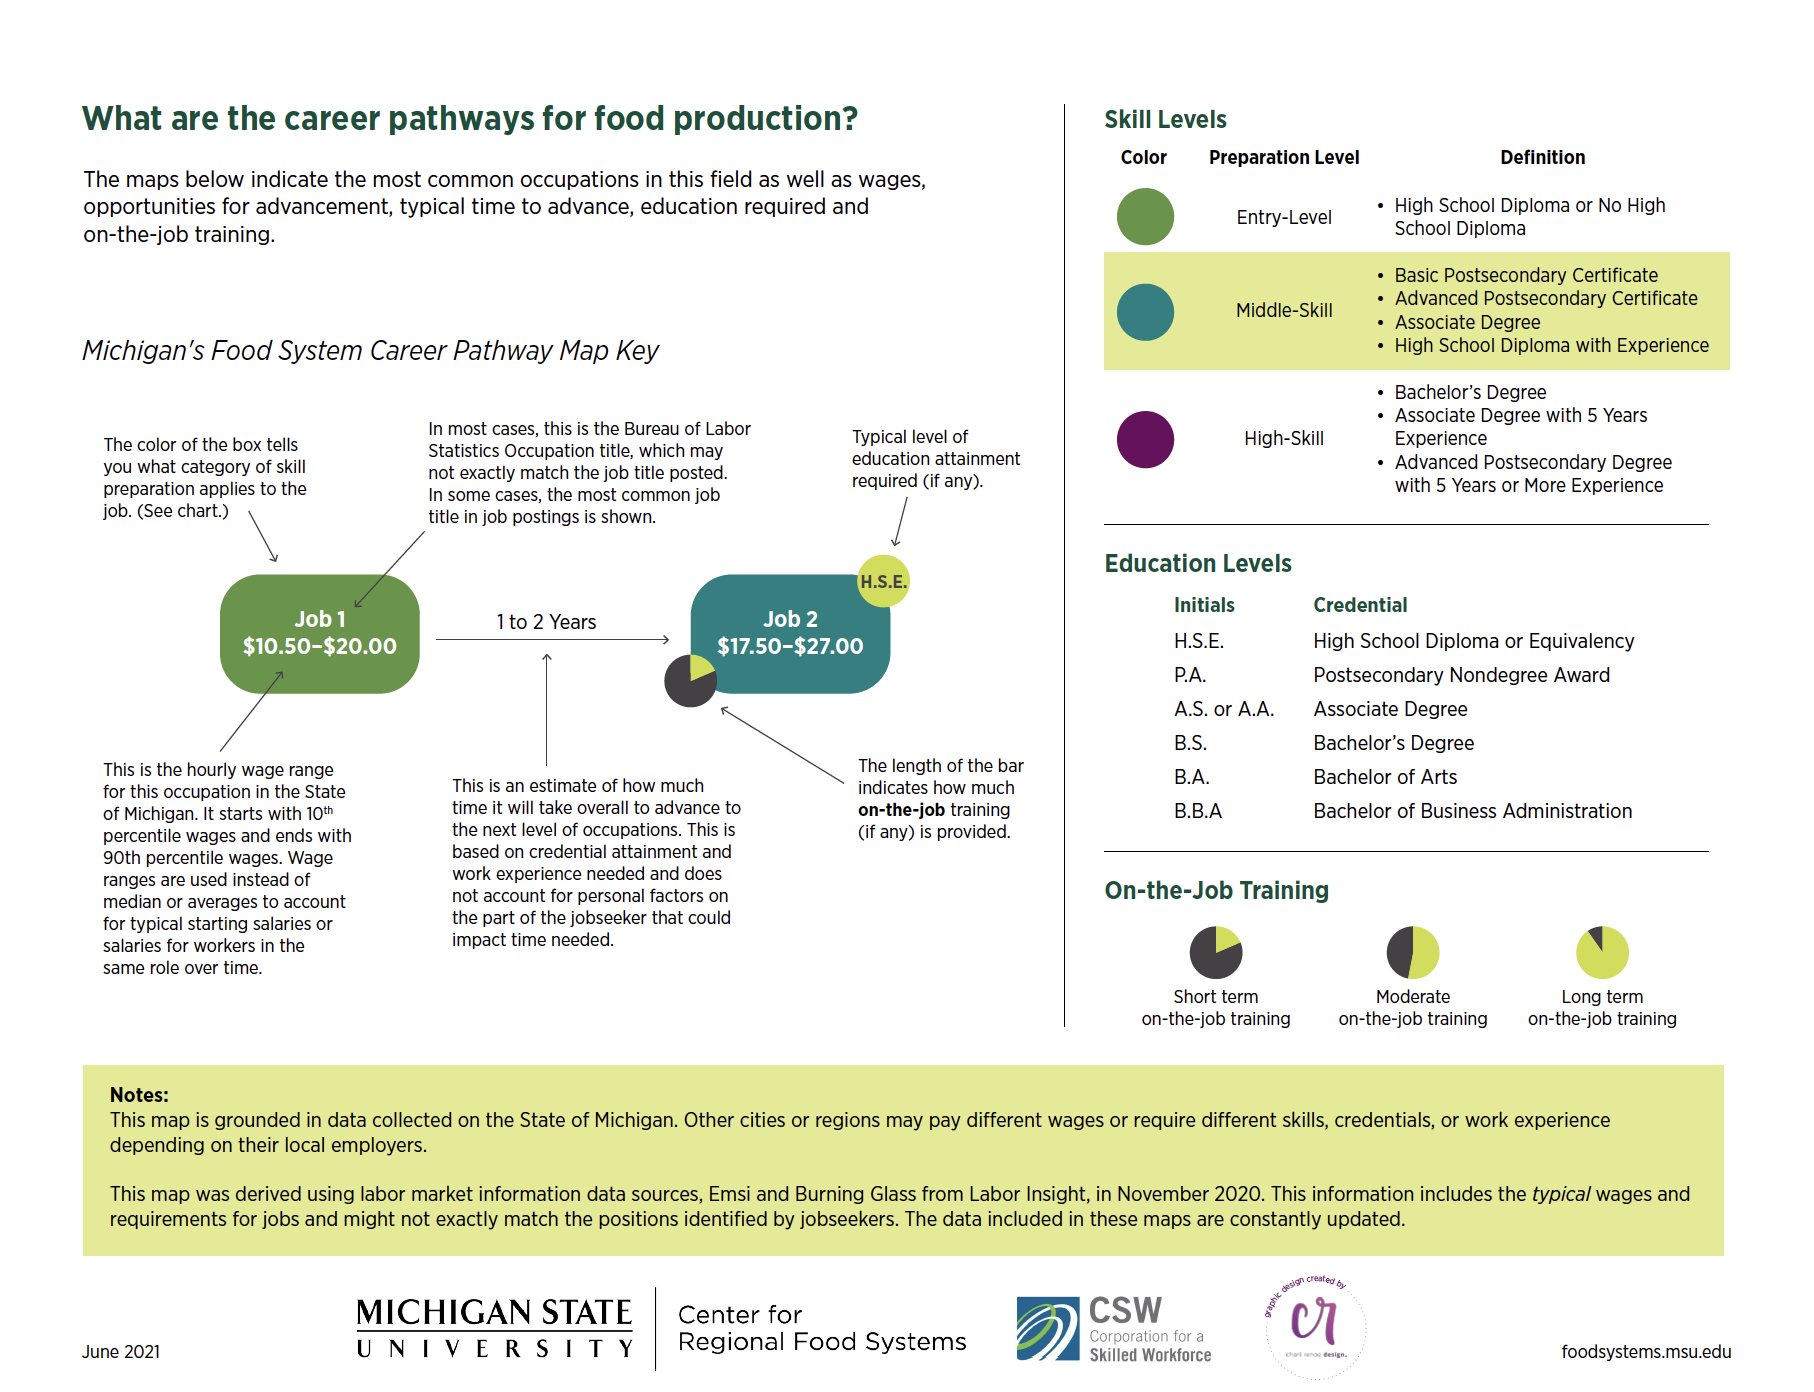 This key describes what the elements of the career pathway maps mean.